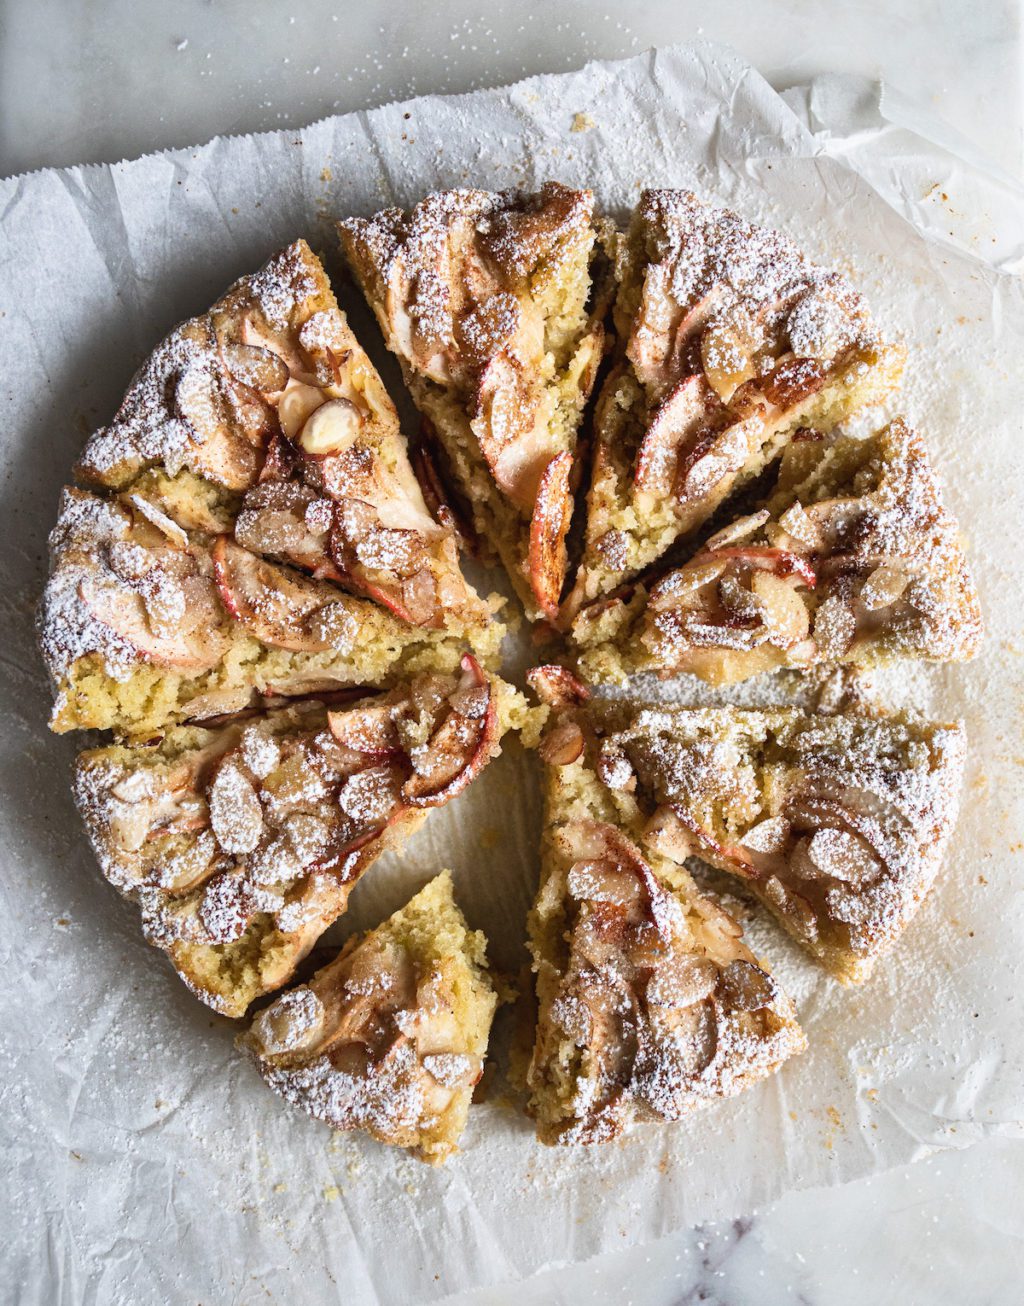 the whole apple cake, dusted in powdered sugar